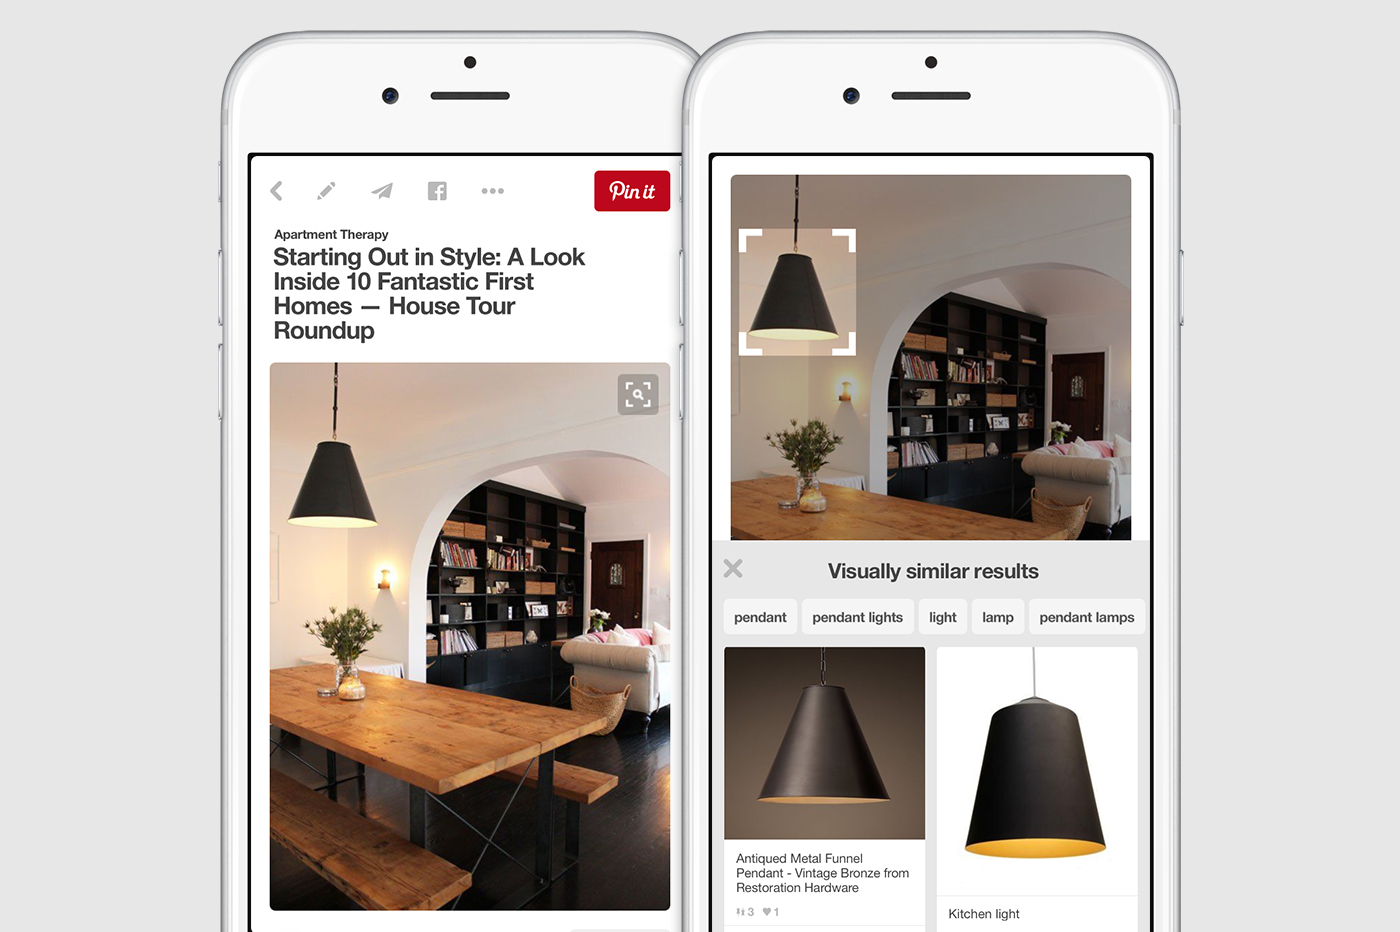 Pinterest Visual Search results